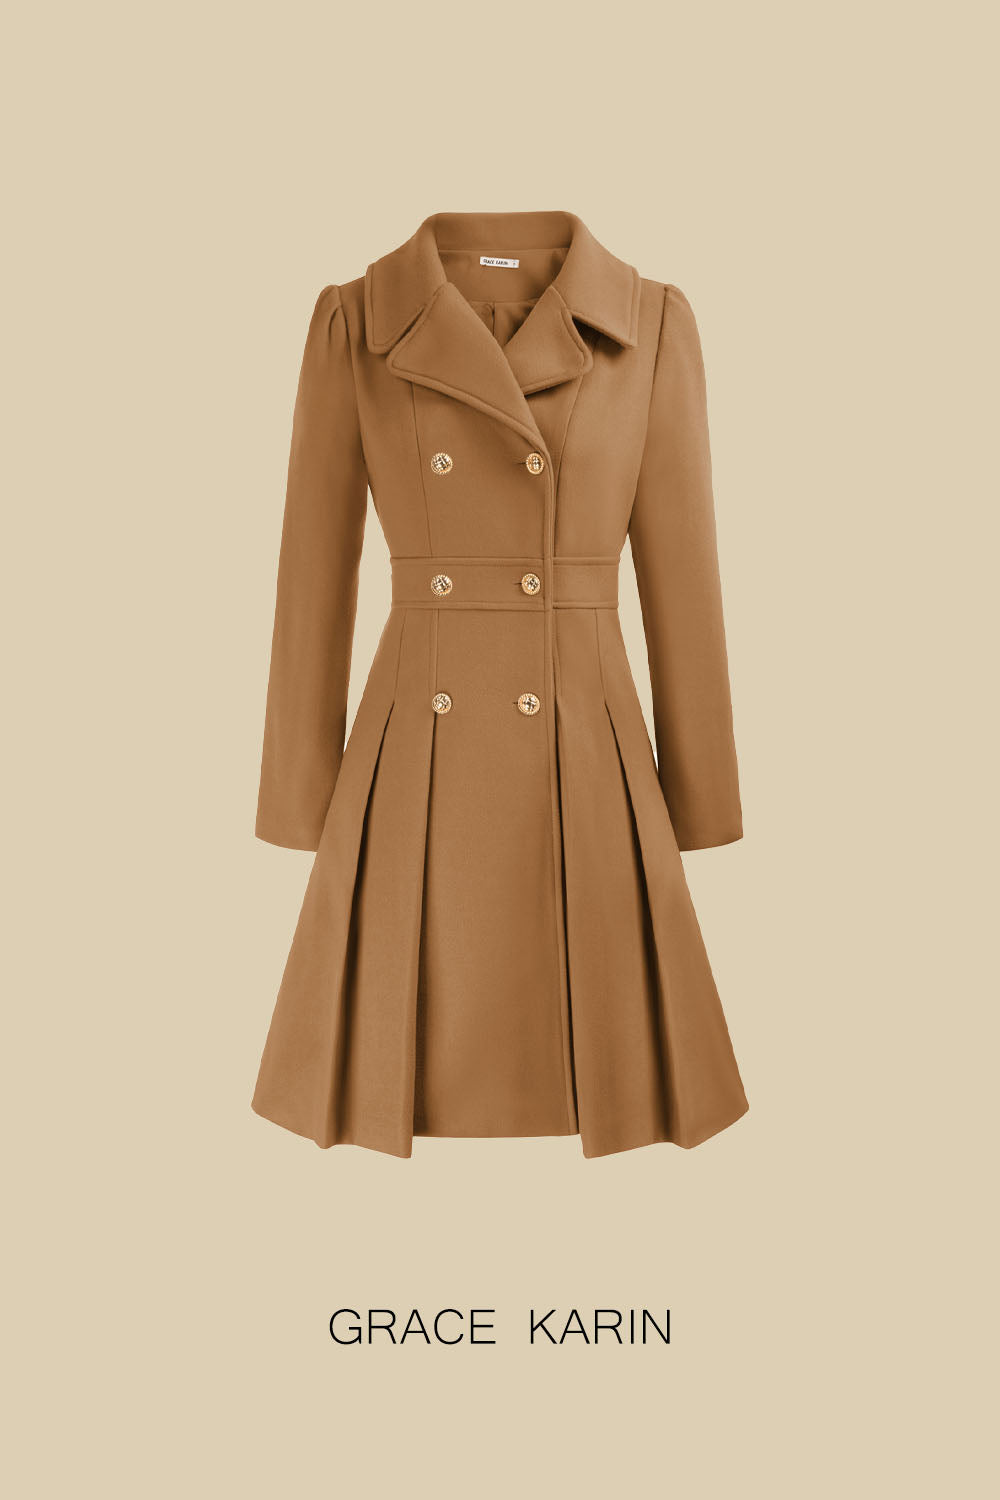 GRACE KARIN Women Double Breasted Overcoat Above Knee Pleated A-Line Wool Blends Coat